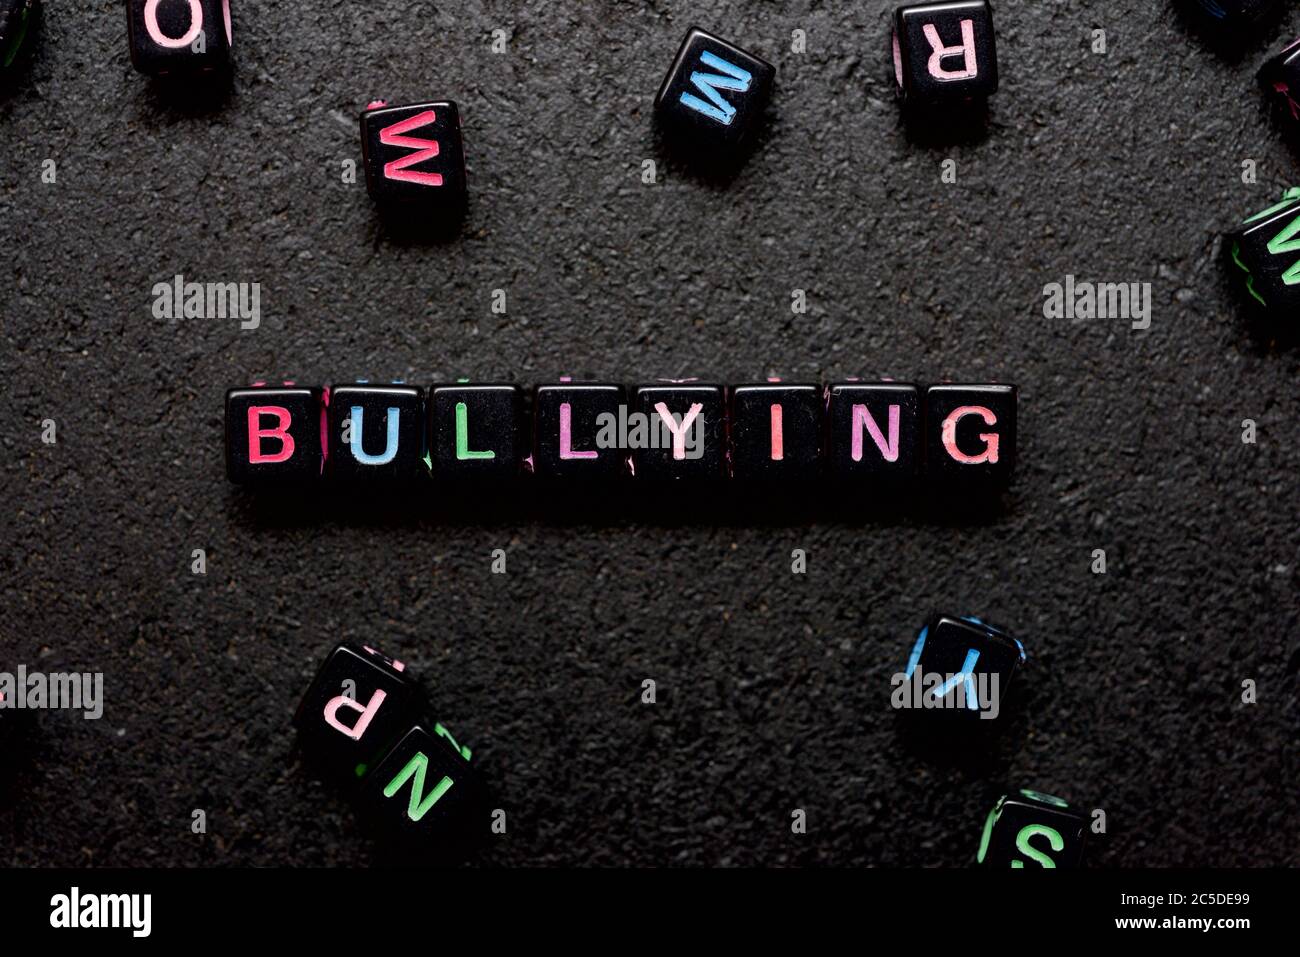 Bullying word on a black table. Stock Photo